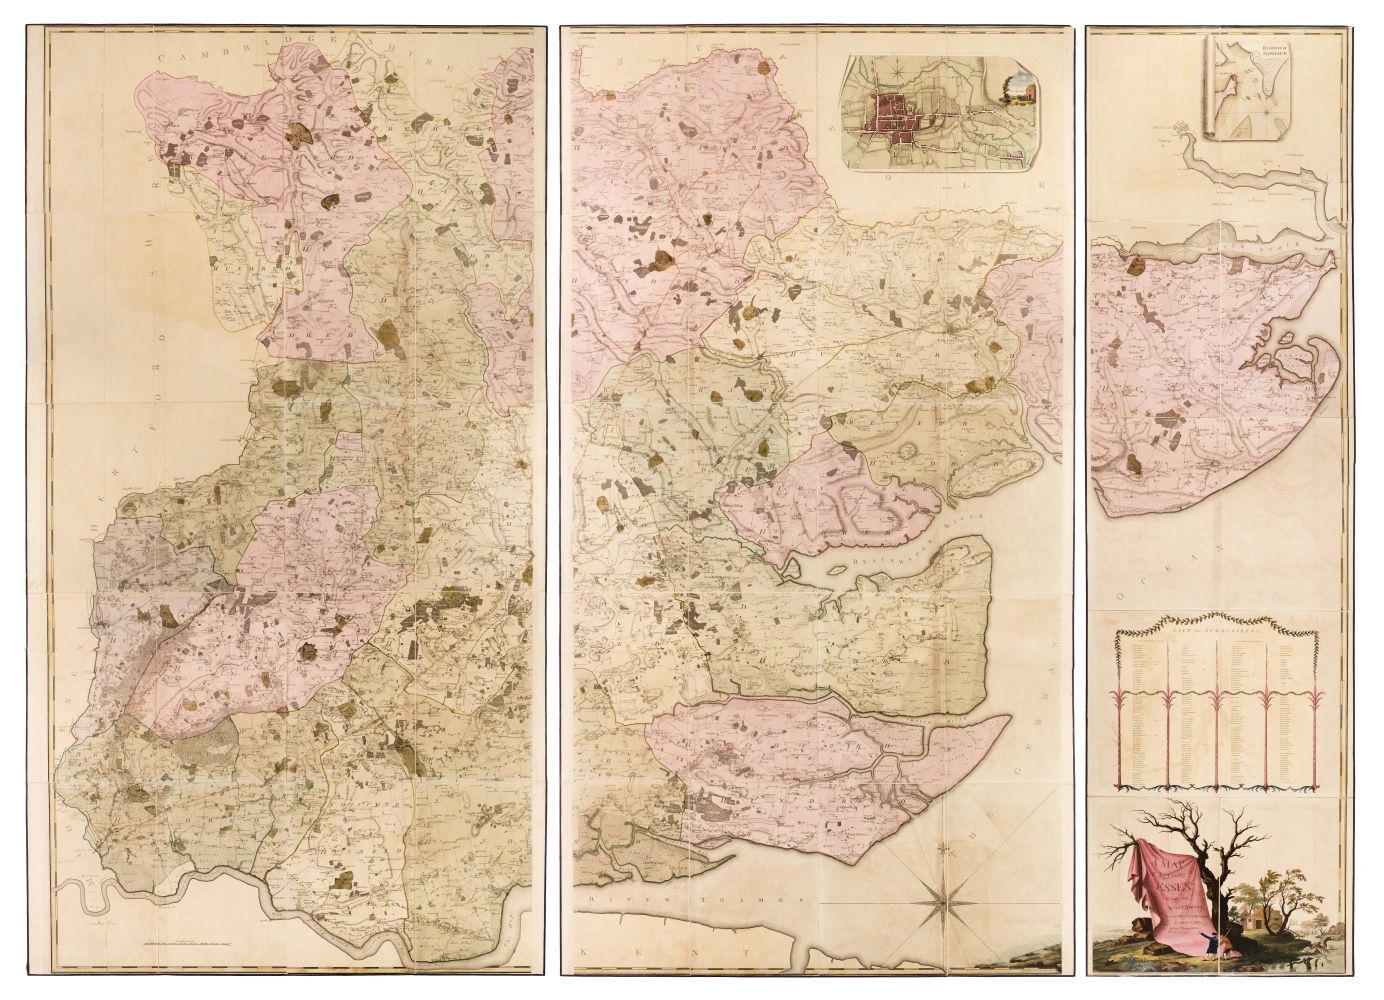 Essex. Essex. Chapman J. & Andre P.), A map of the County of Essex, from an actual Survey..., 1785